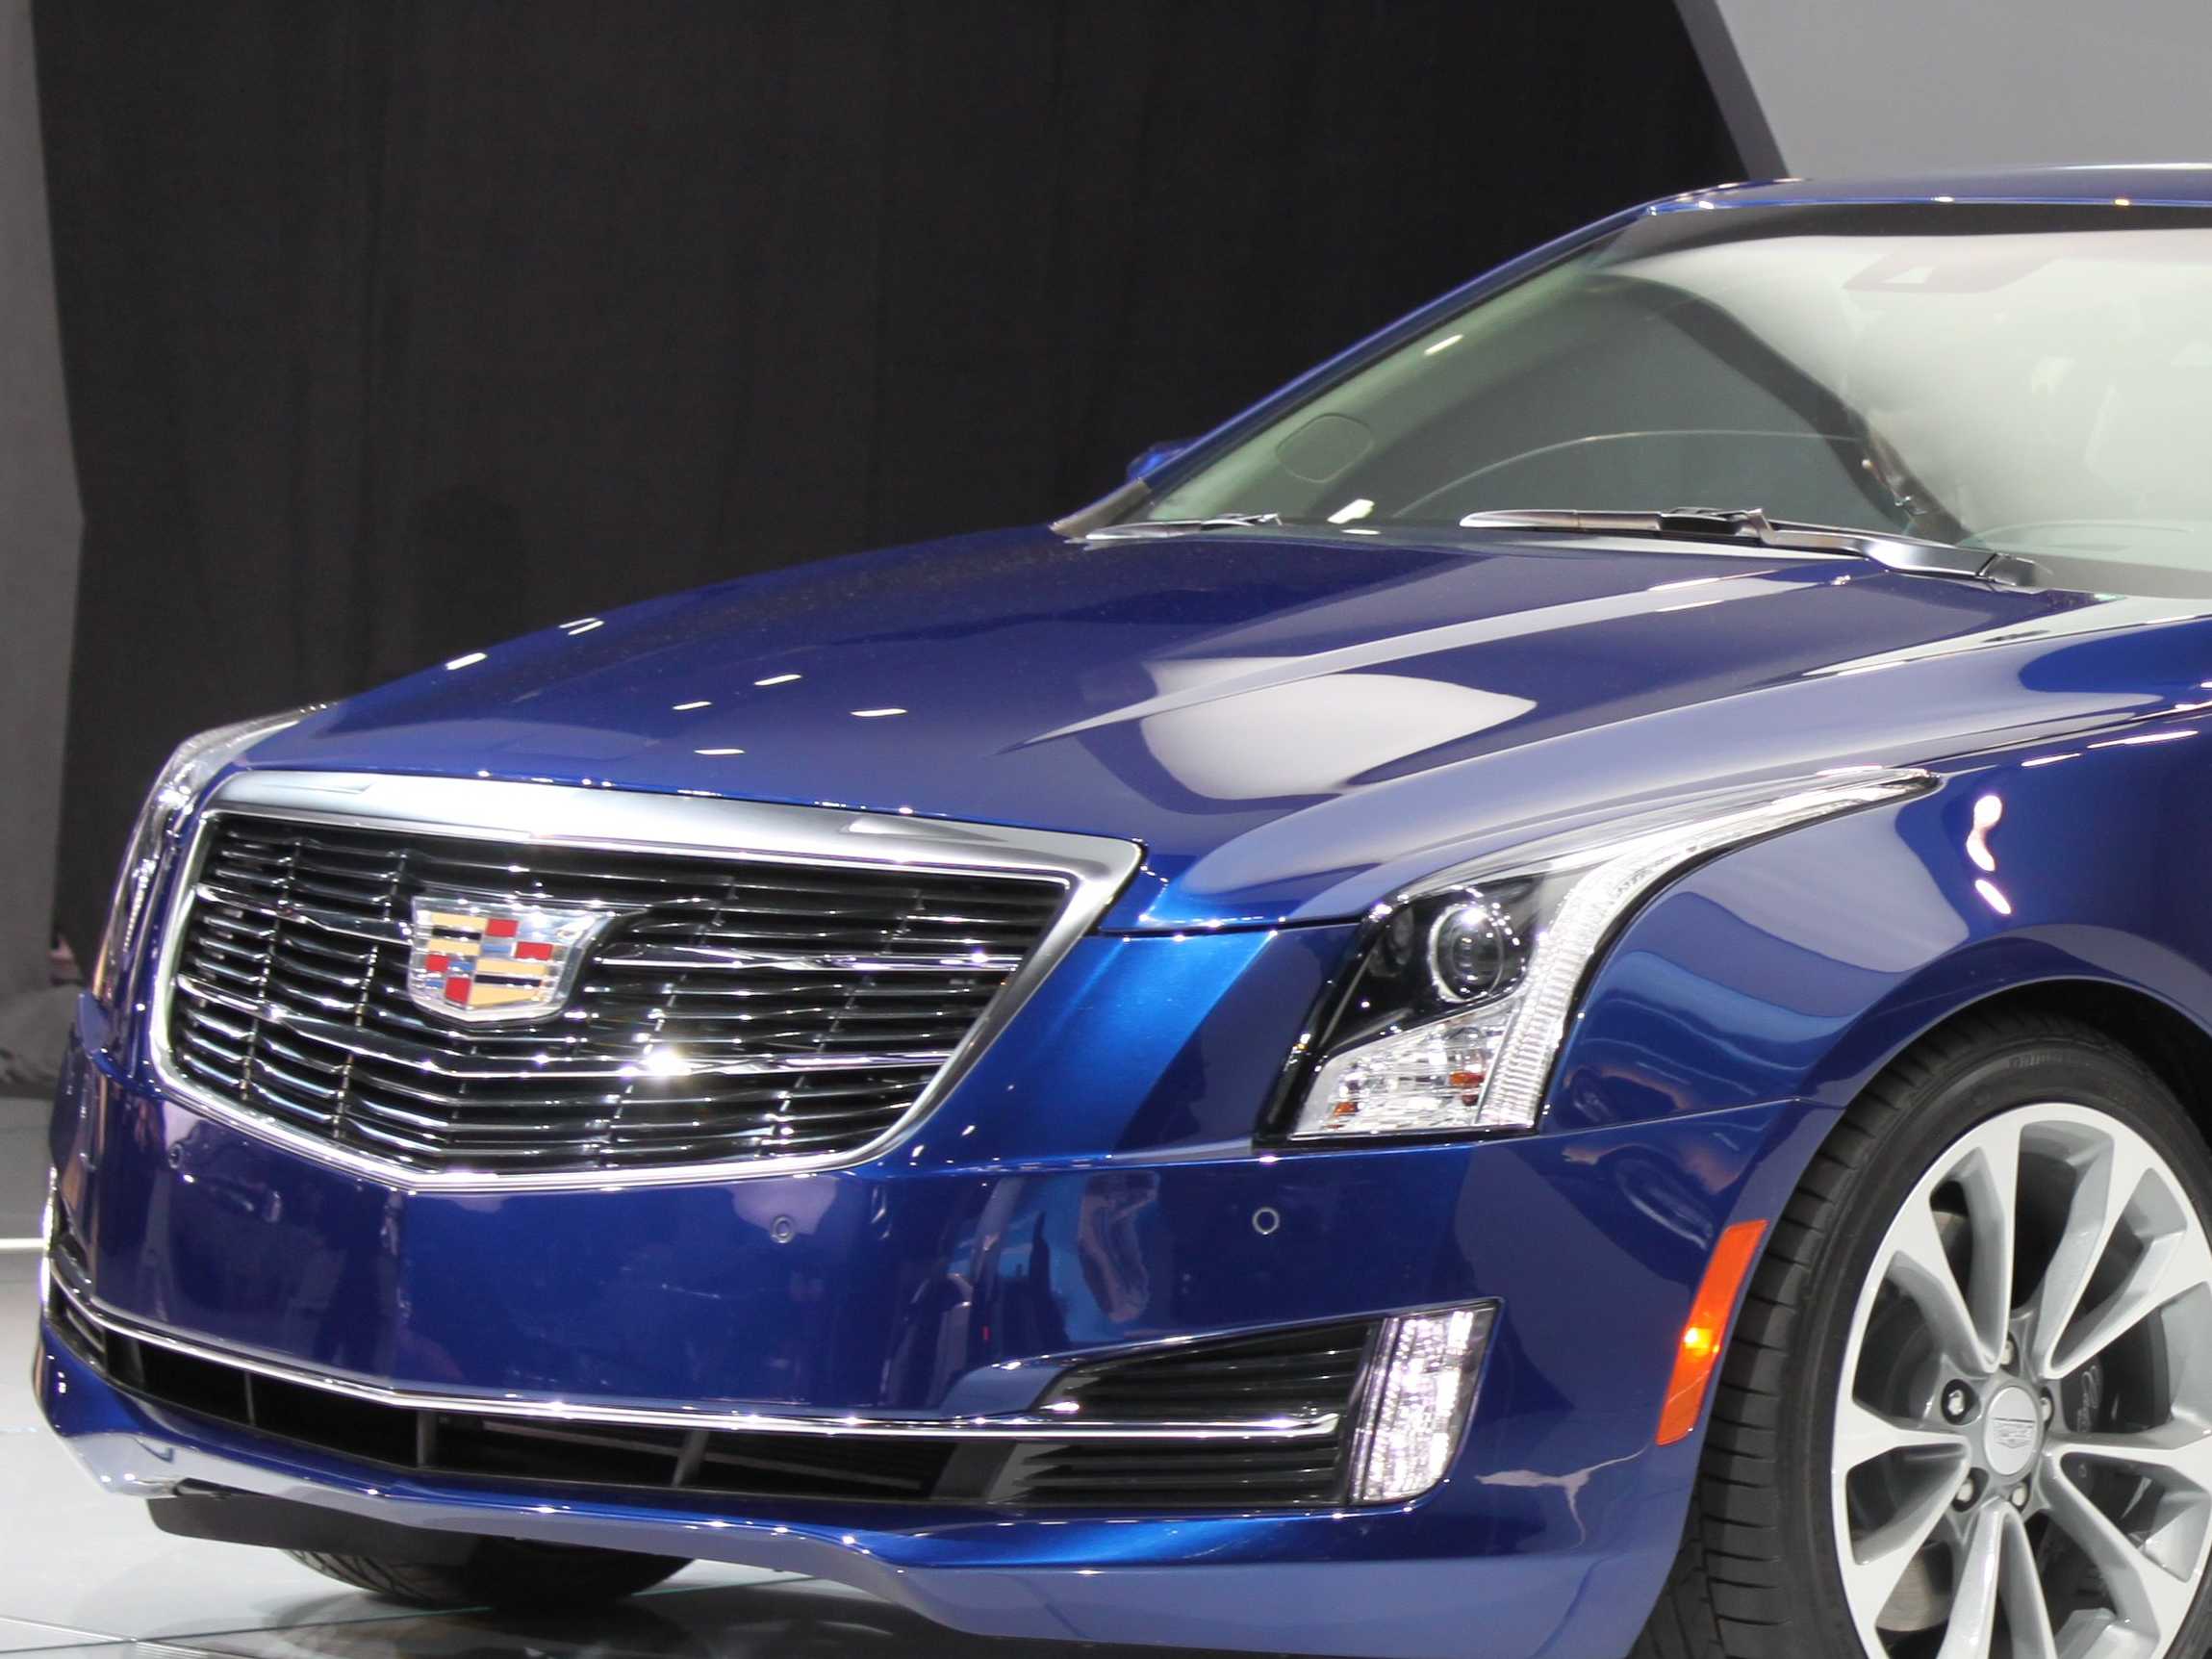 2014 New Cadillac Logo - Cadillac Logo, Cadillac Car Symbol Meaning and History. Car Brand